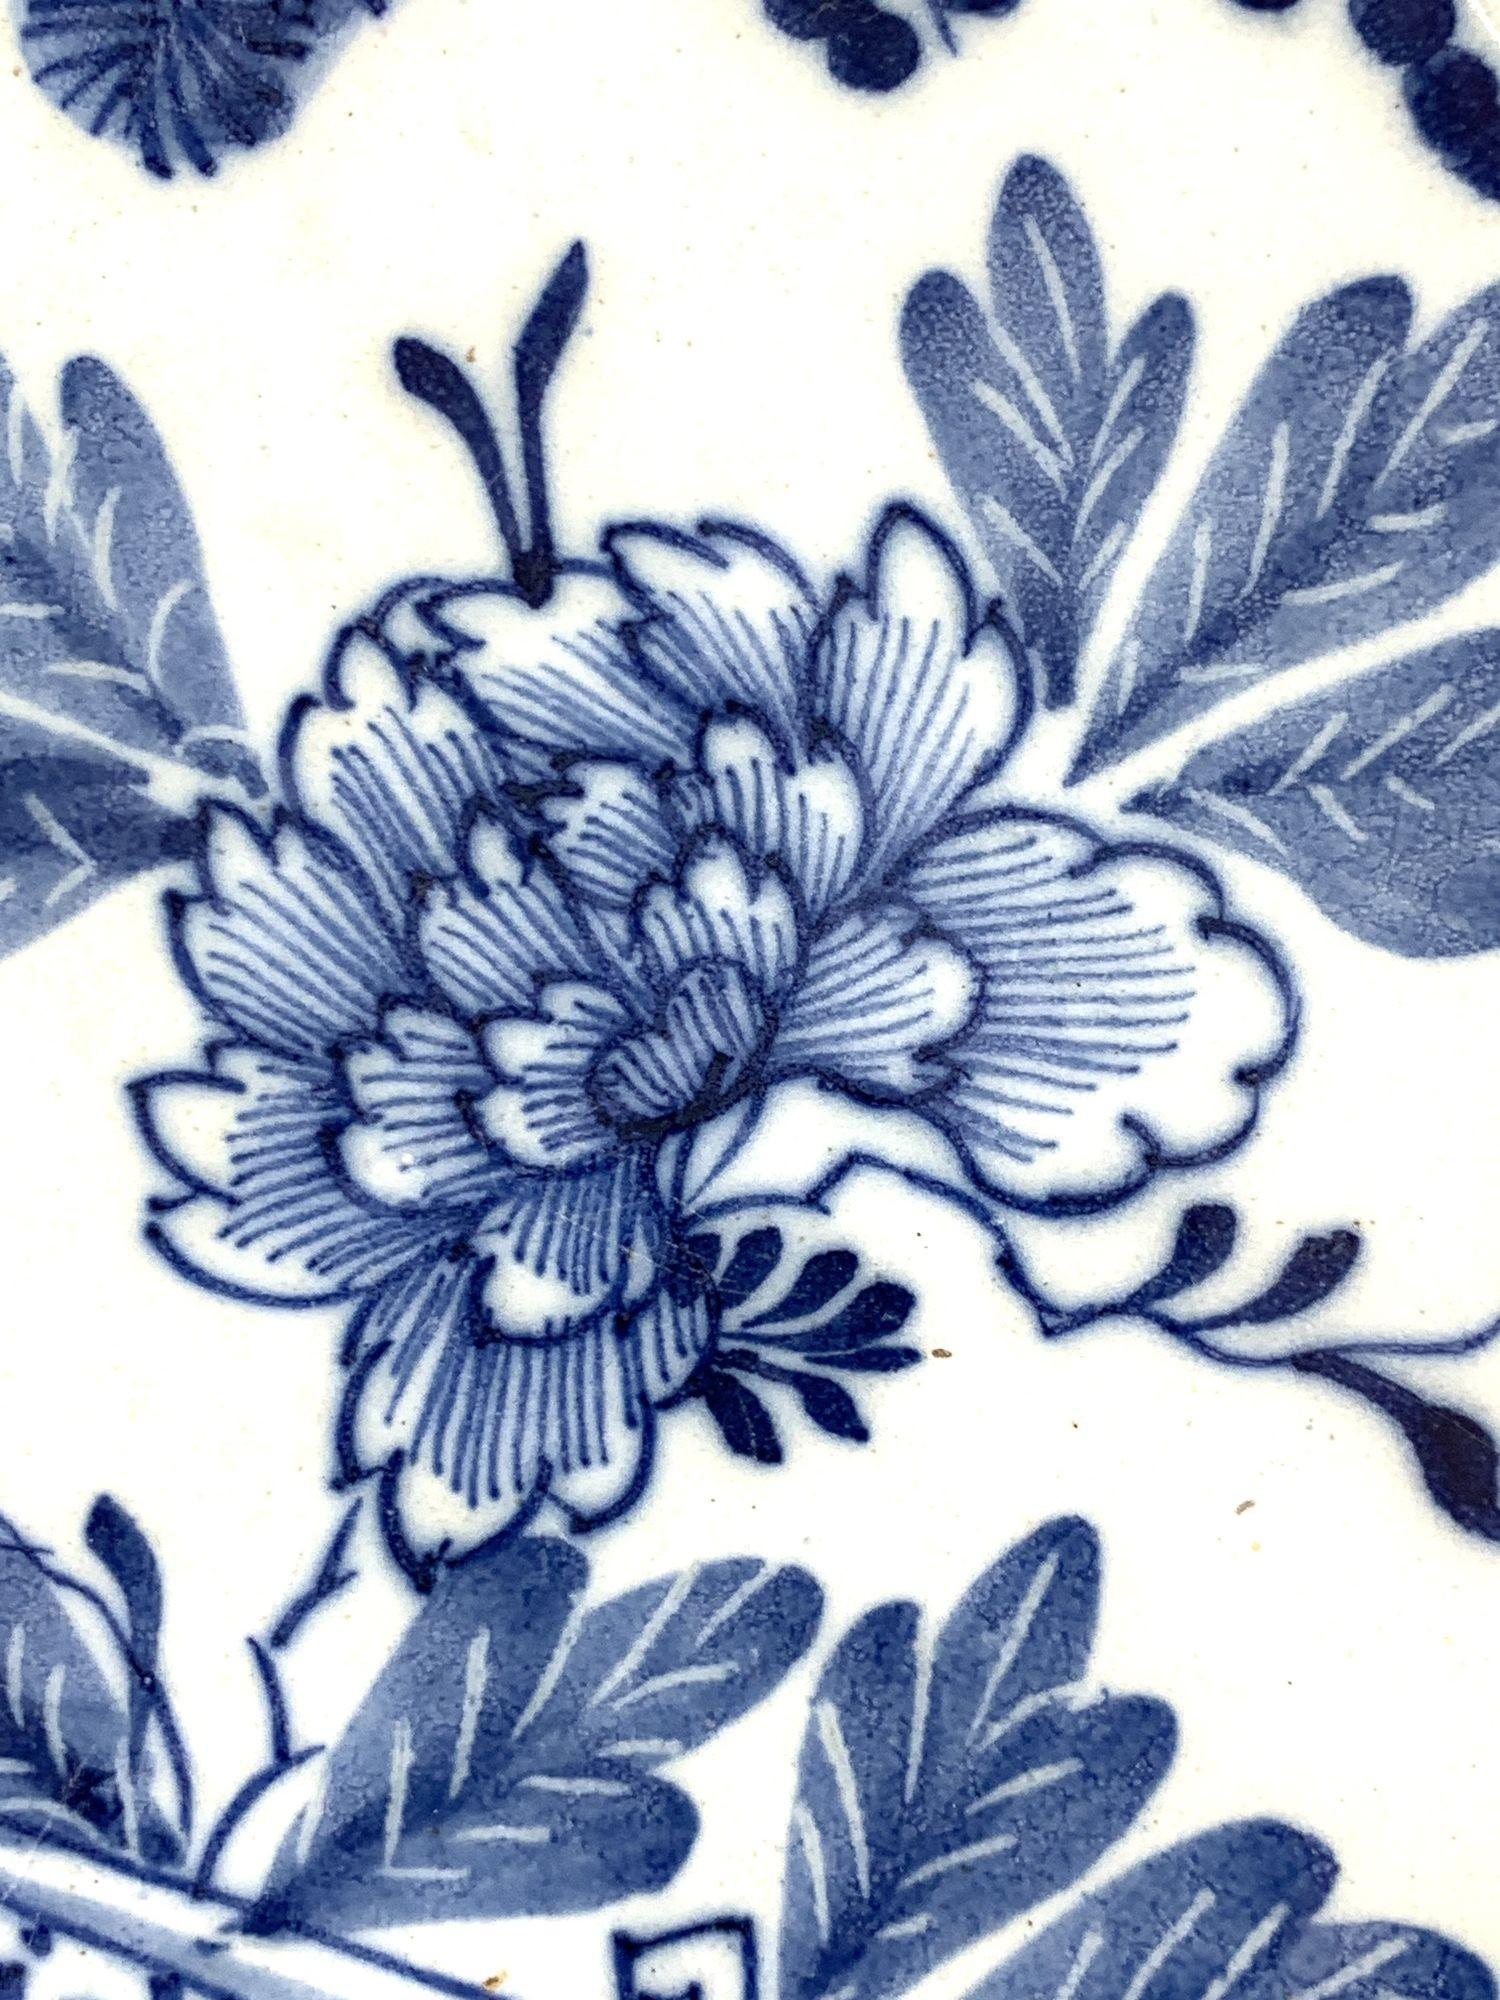 Chinoiserie Blue and White Dutch Delft Charger Netherlands Circa 1780 with Mark of 